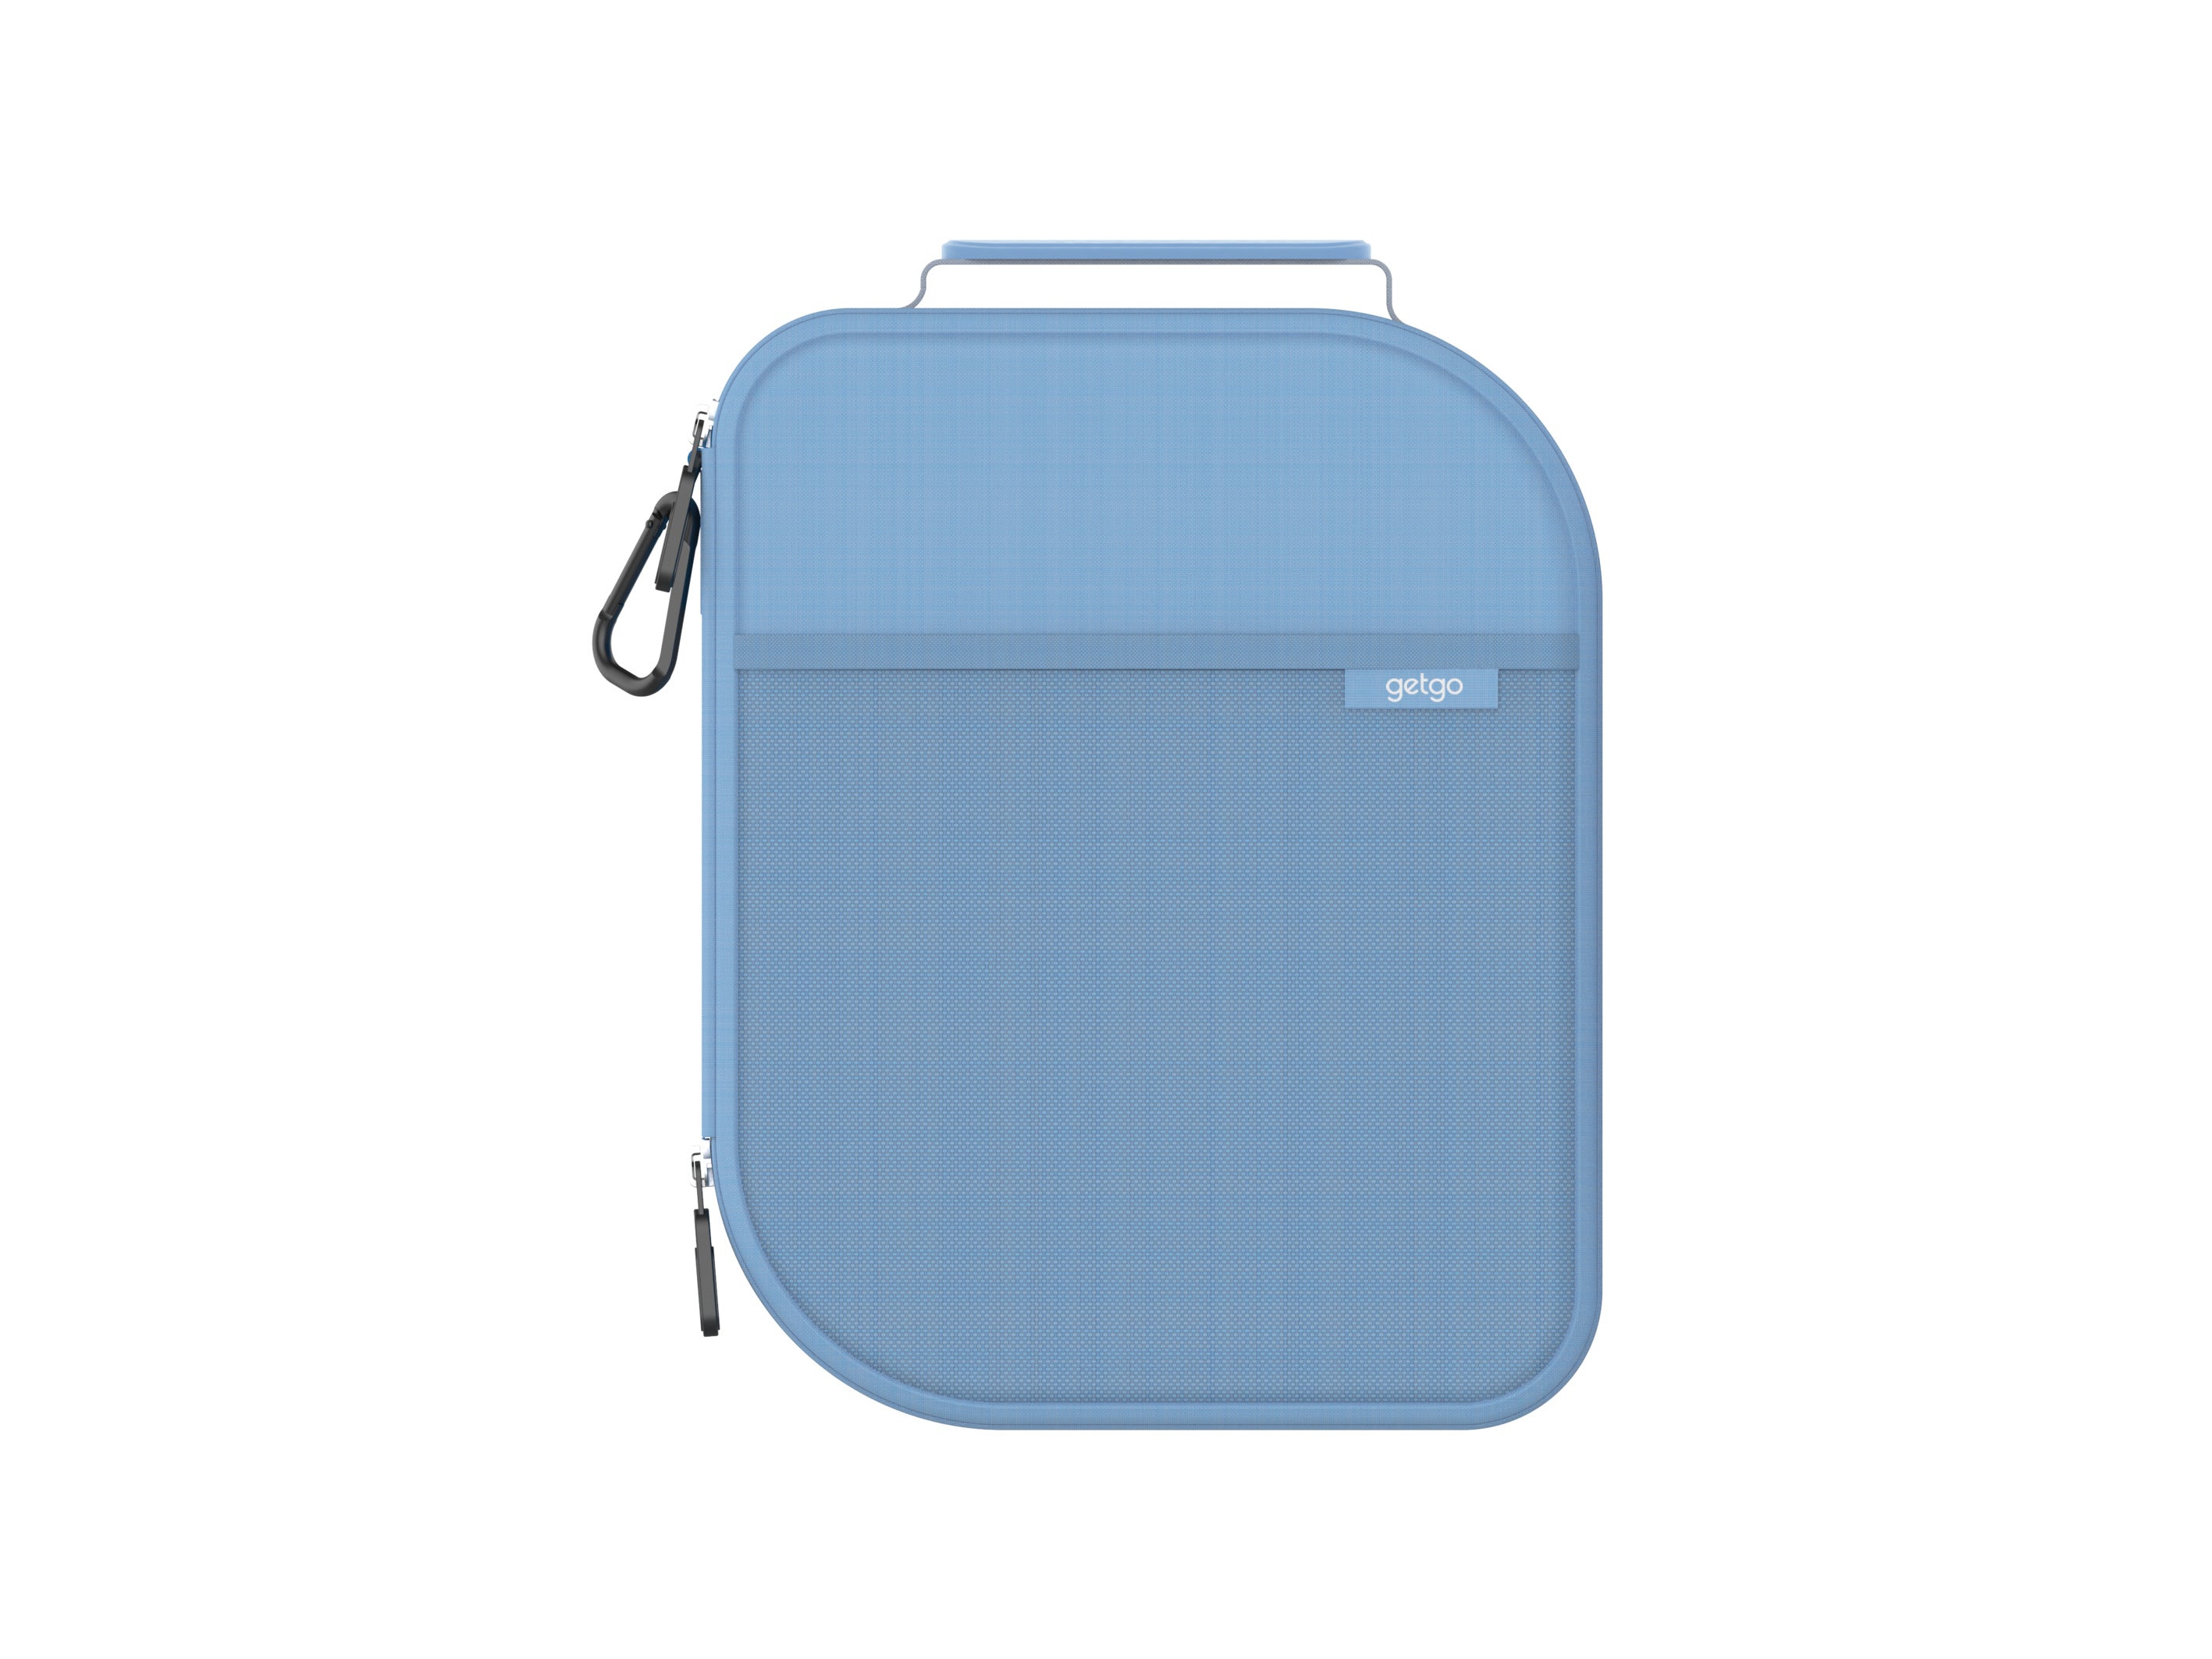 Getgo Insulated Lunch Bag With Pocket Blue